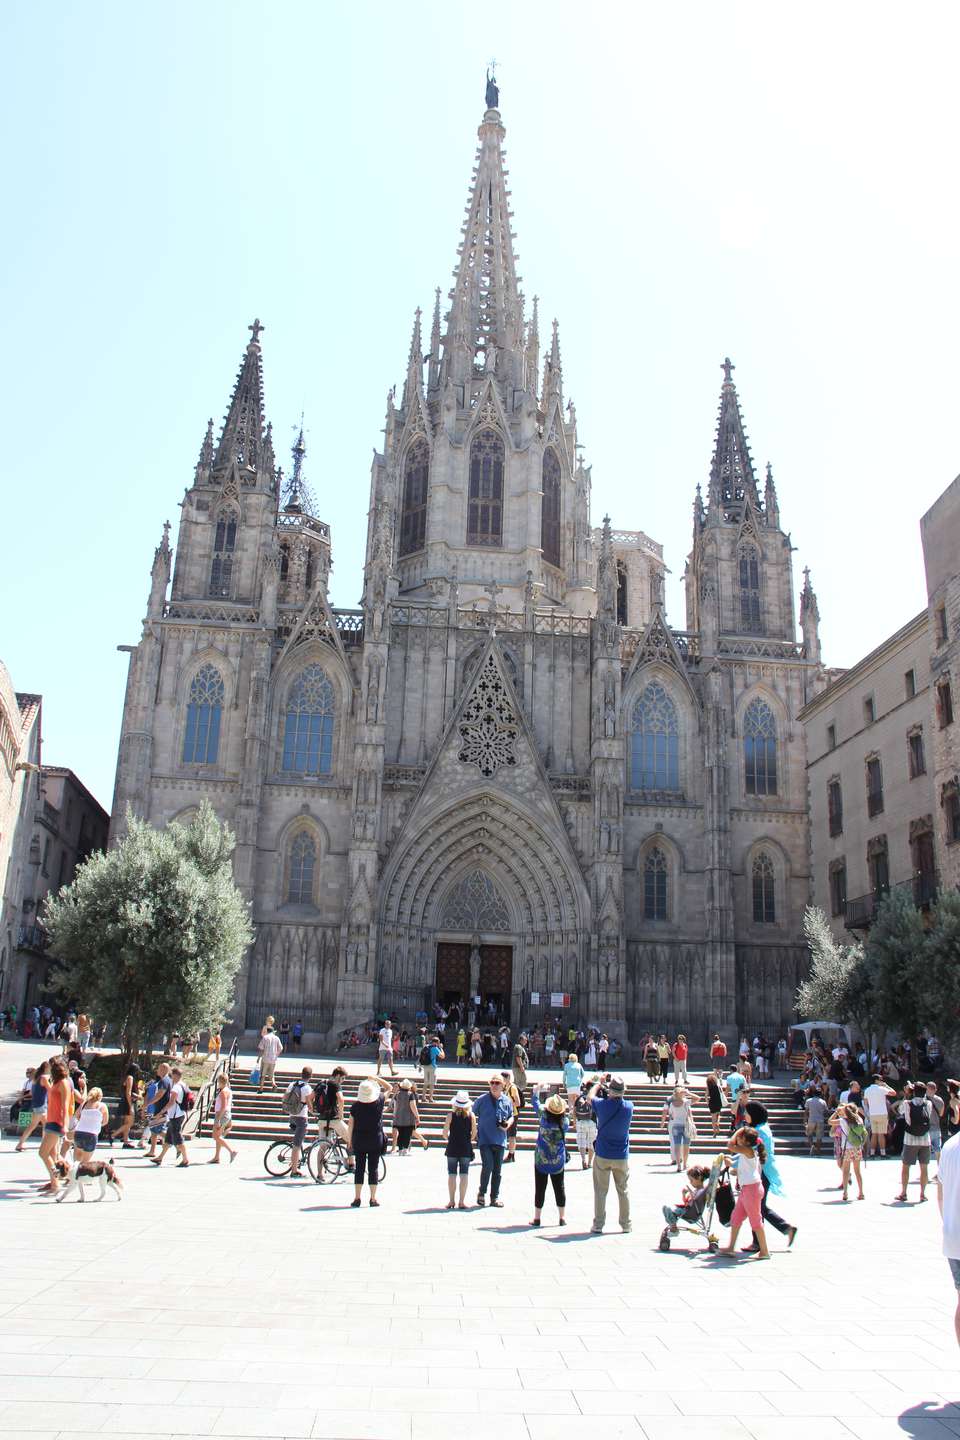 The Best of Barcelona's Churches